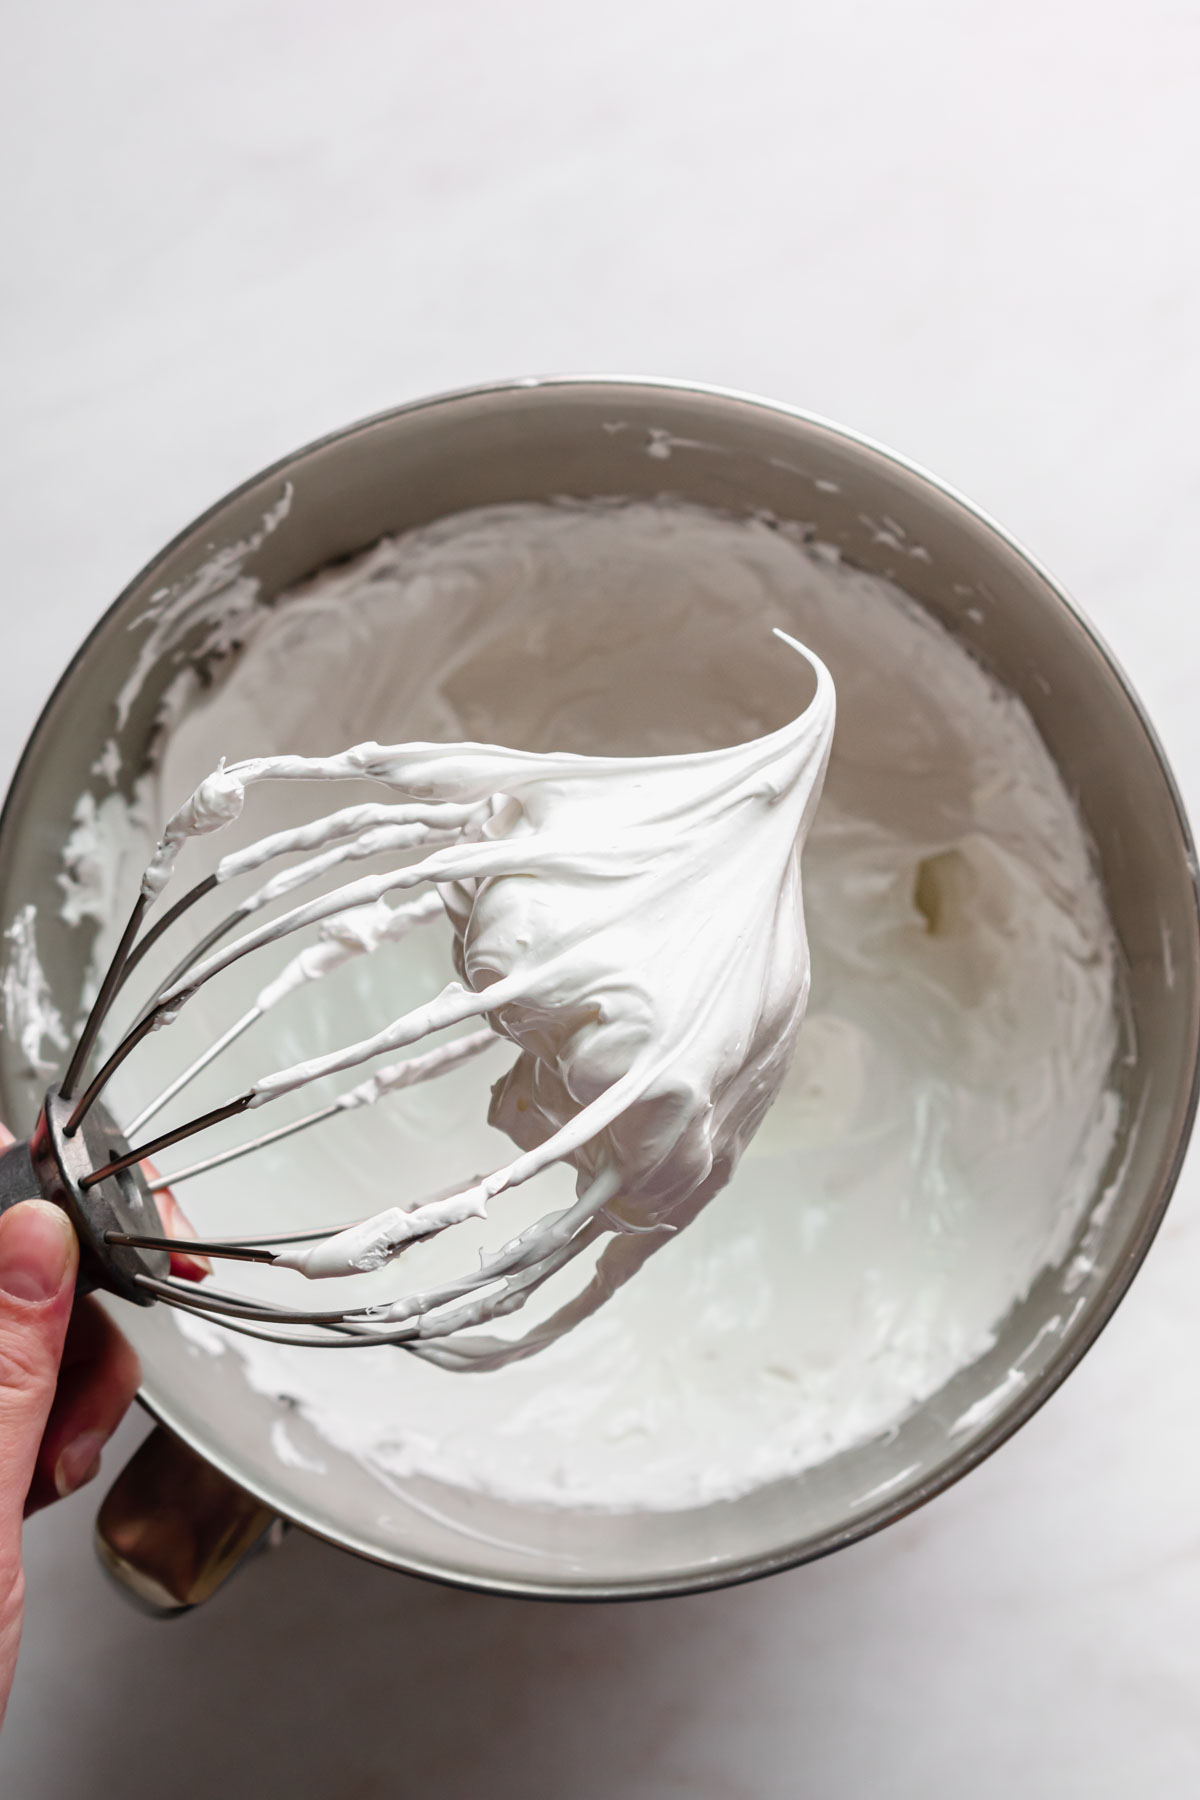 A whisk held out over bowl to show the stiff swiss meringue.